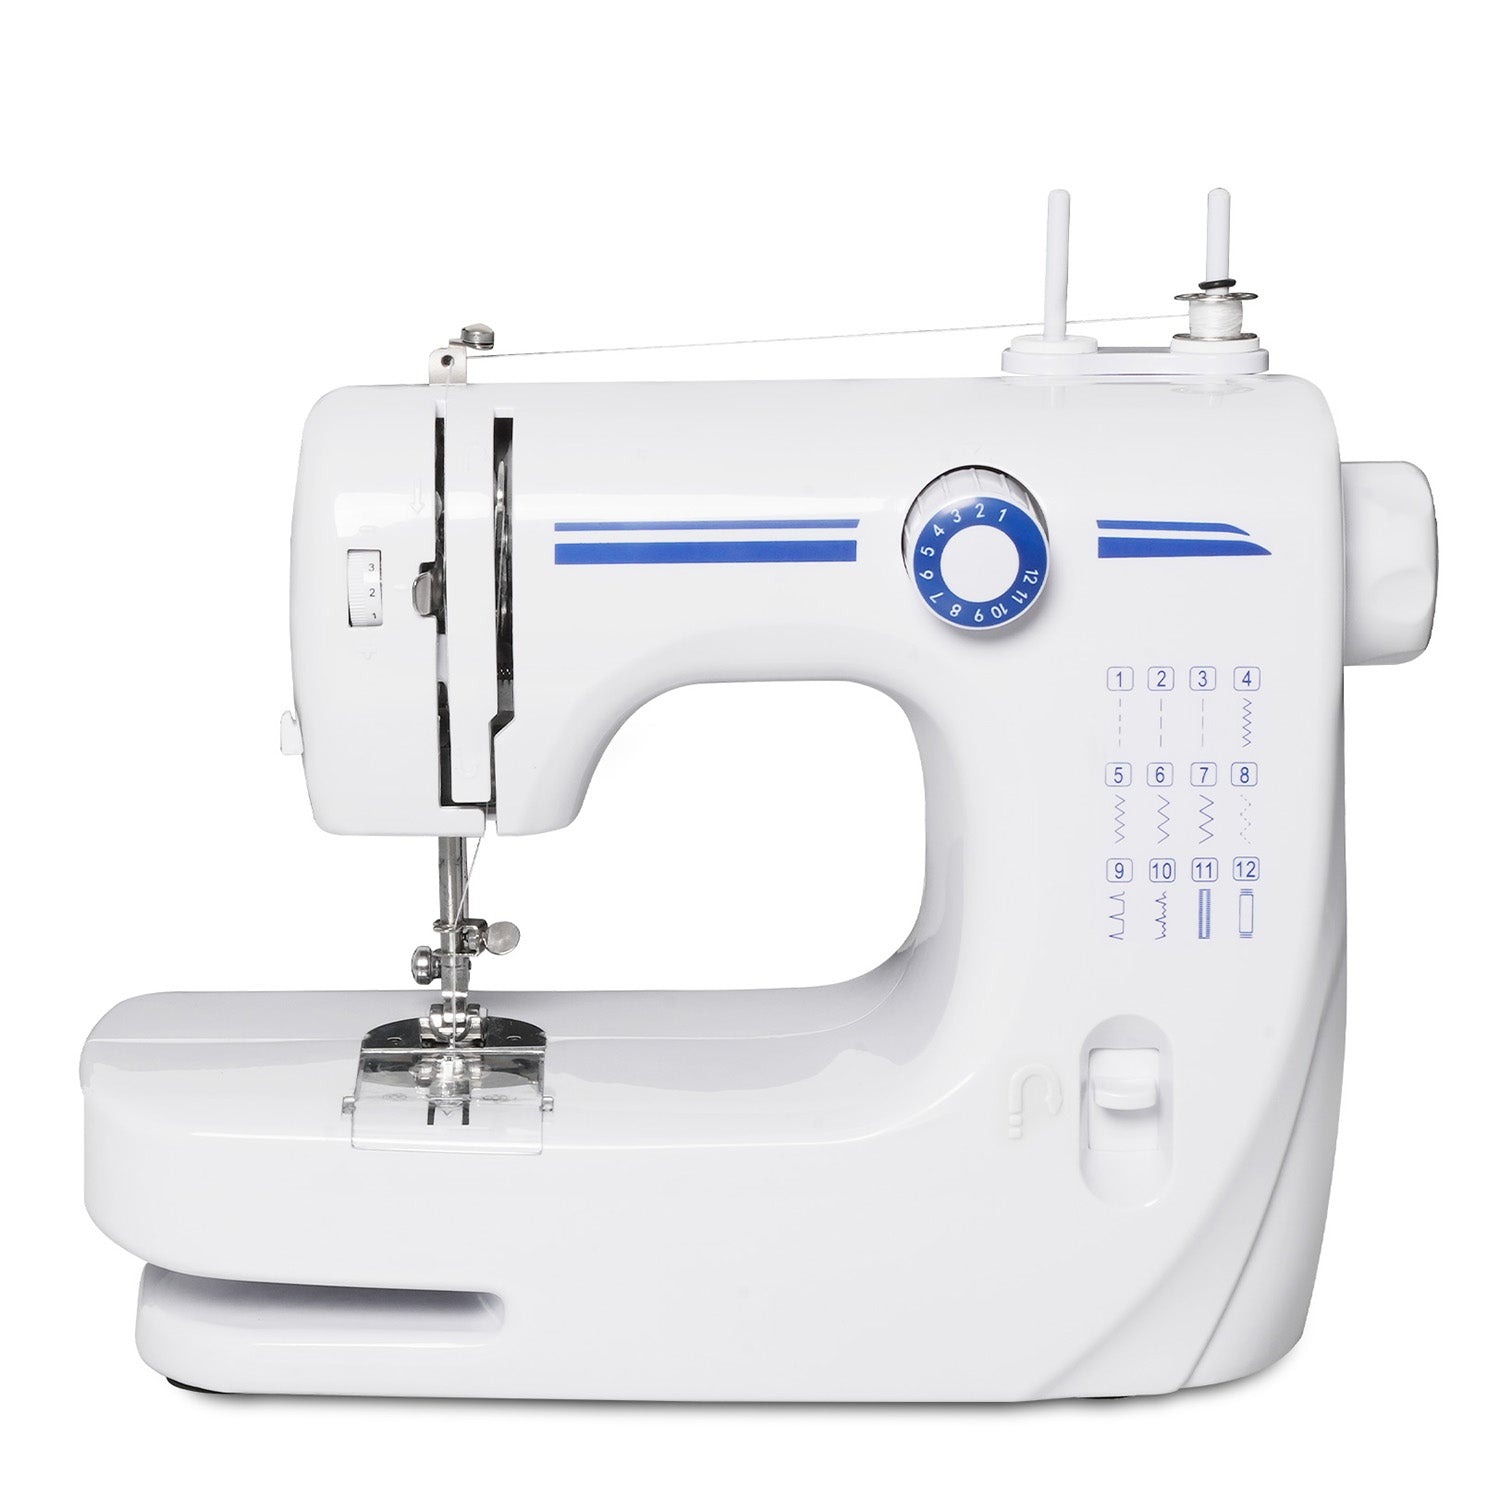 Portable Mini Sewing Machine for Beginners with Foot Pedal 12 Built-In Stitches Double Thread, Blue